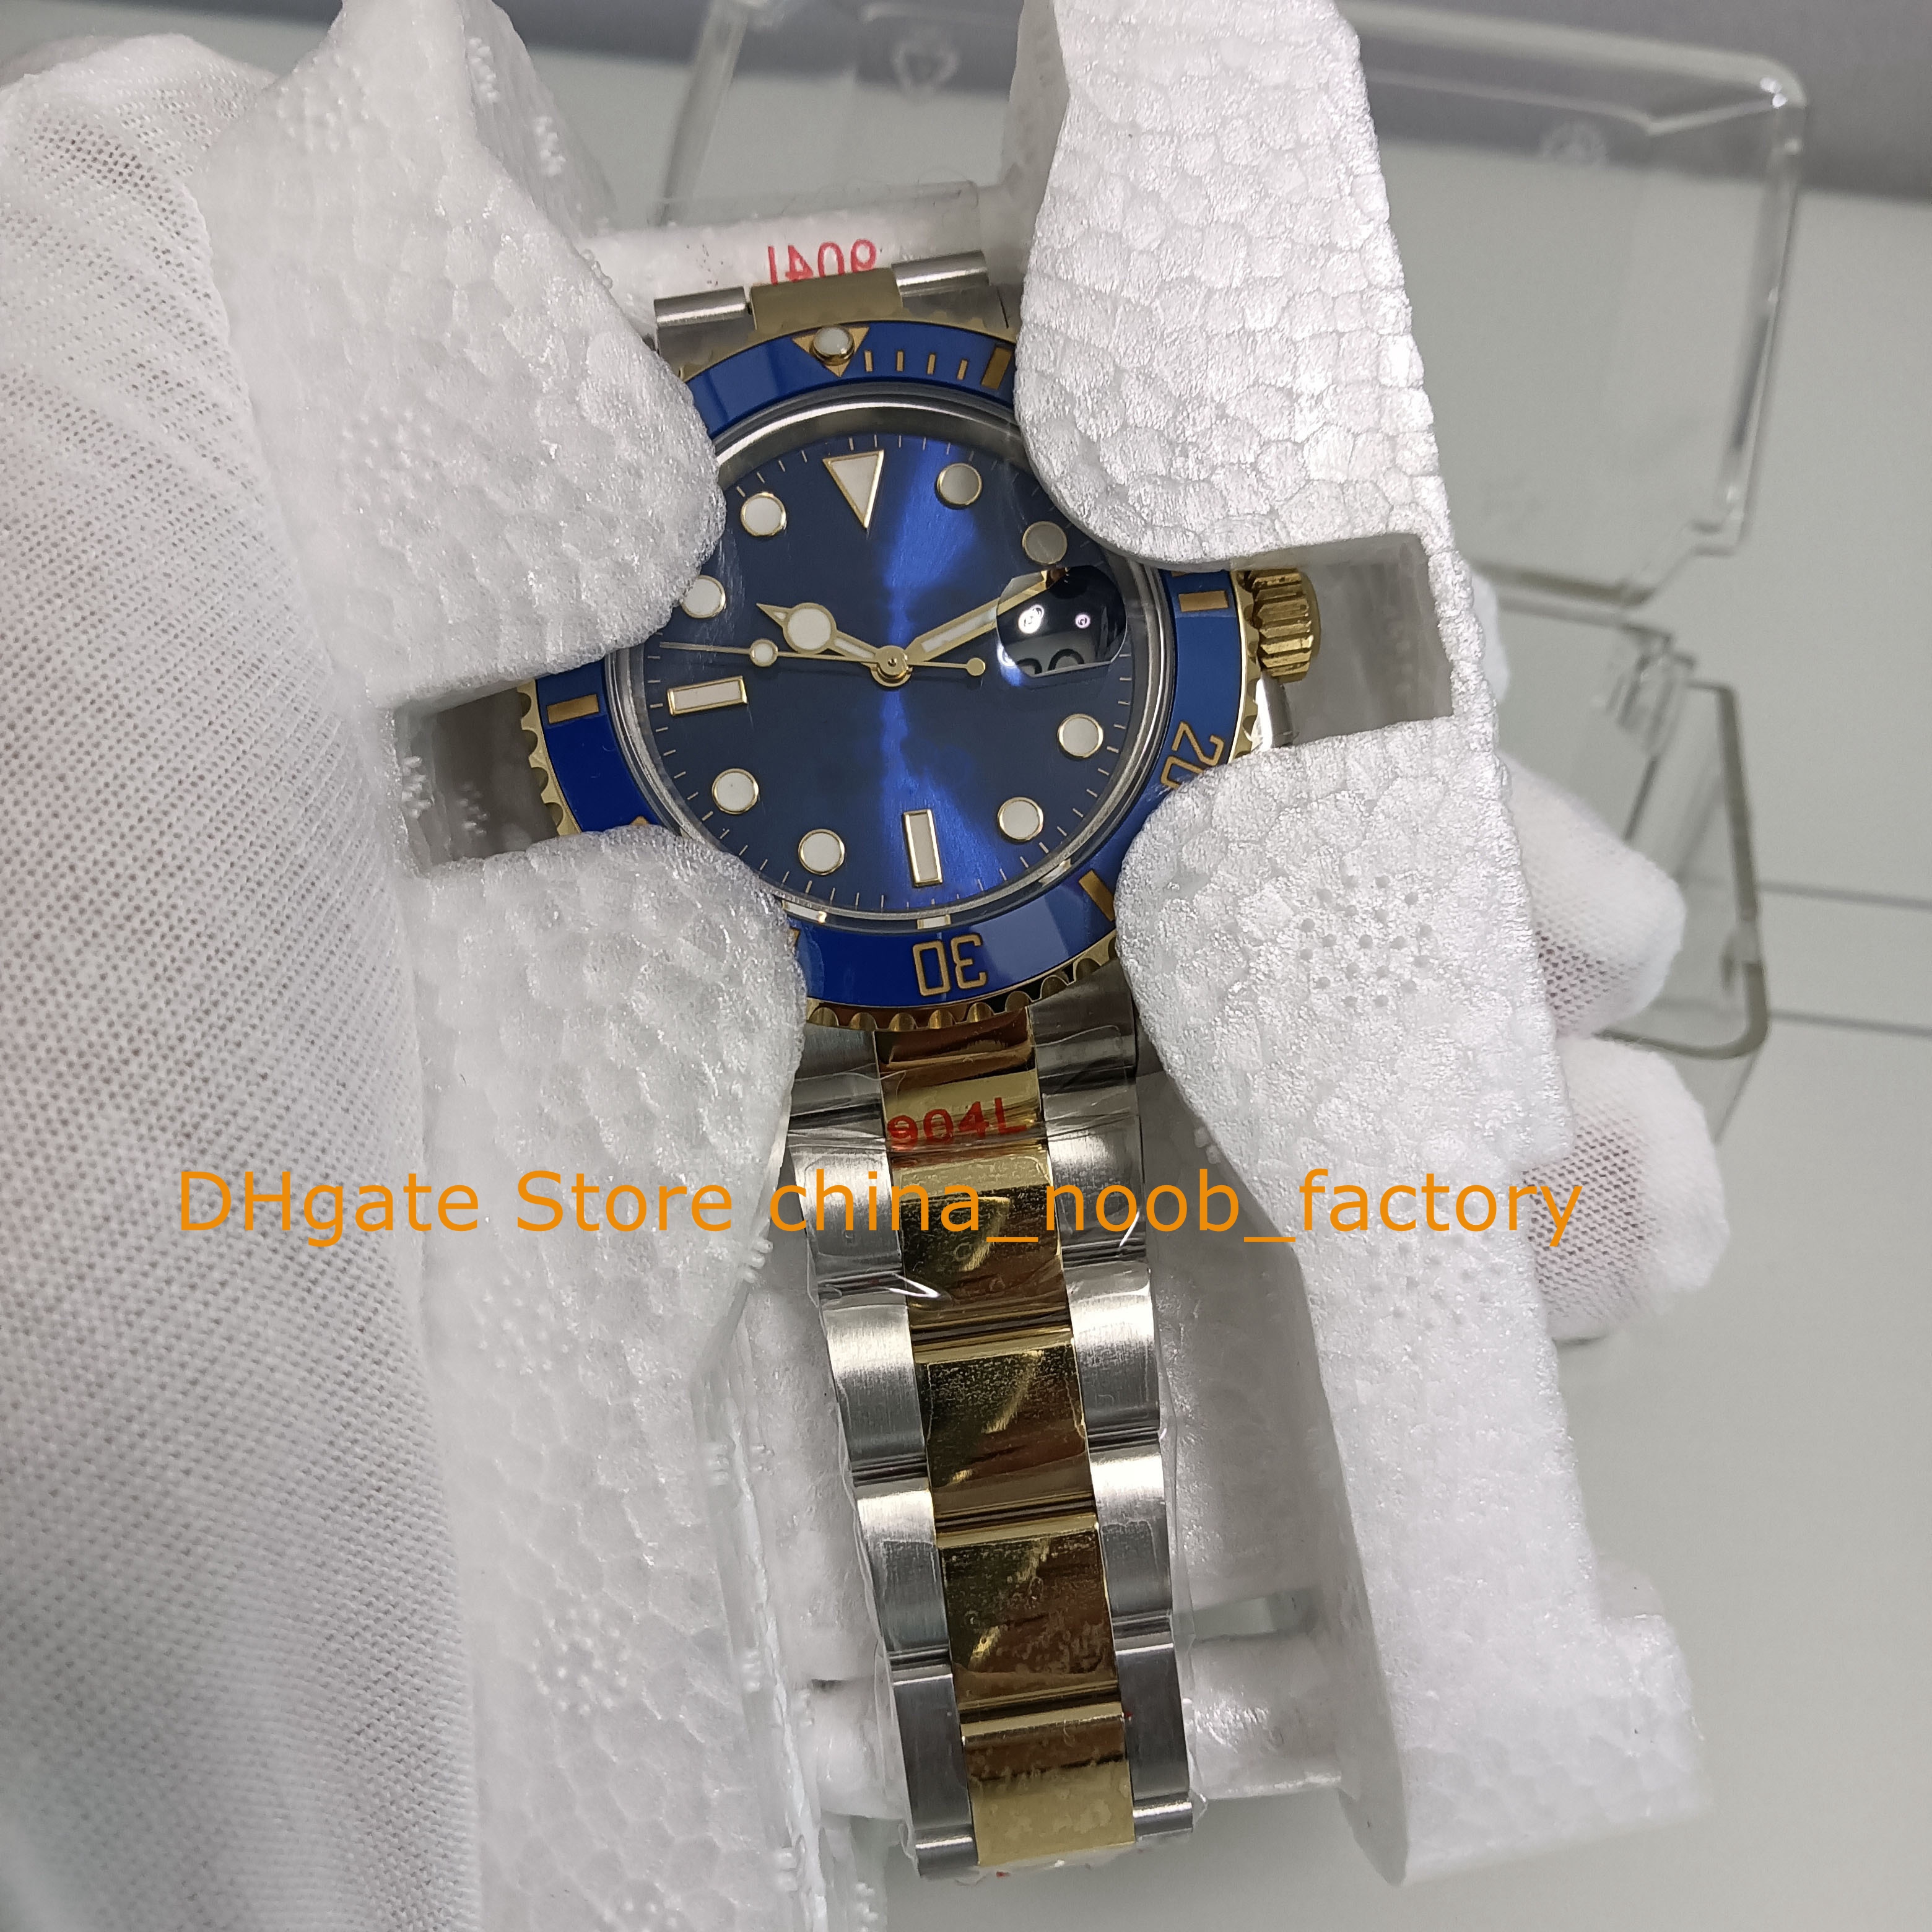 7 Style Watches For Mens Automatic Mens 40mm 2Tone 18K Yellow Gold 904L Steel Blue Ceramic GMF Cal.3135 Movement Watch Sapphire Waterproof Luminous Wristwatches